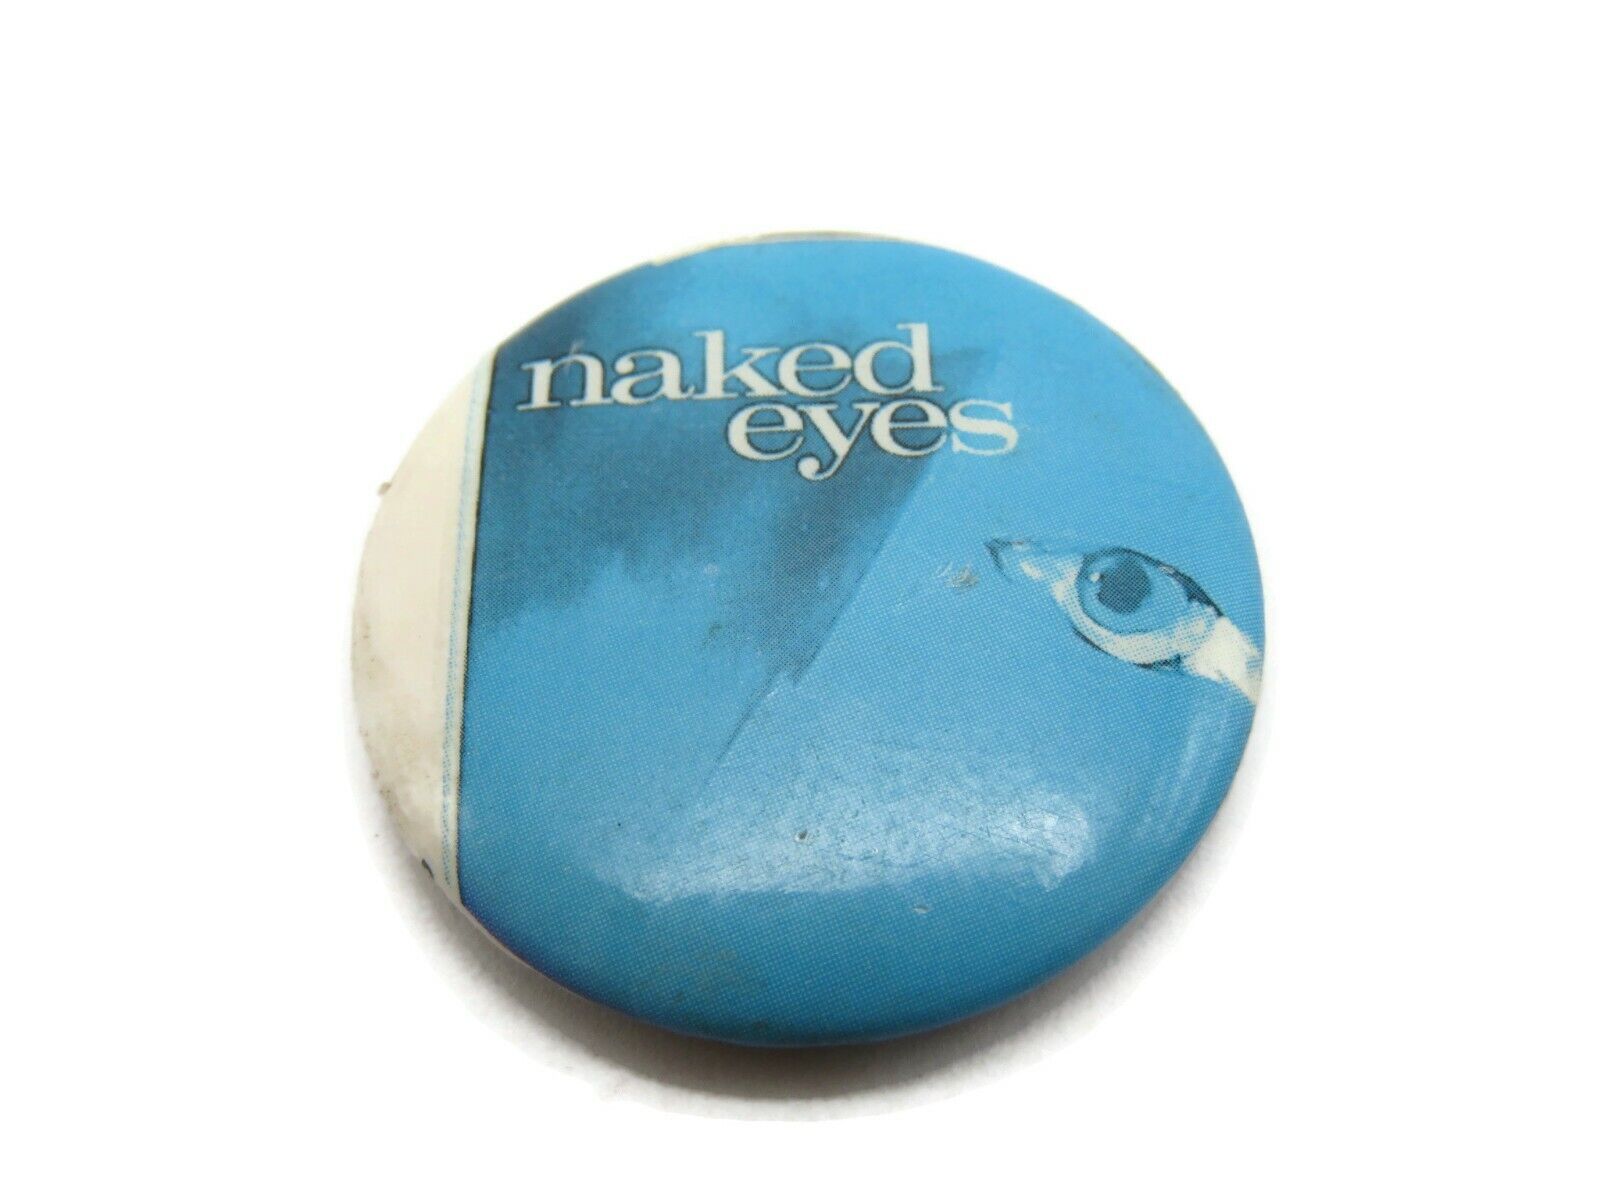 Naked Eyes Pin Button 1983 Vintage Collectible